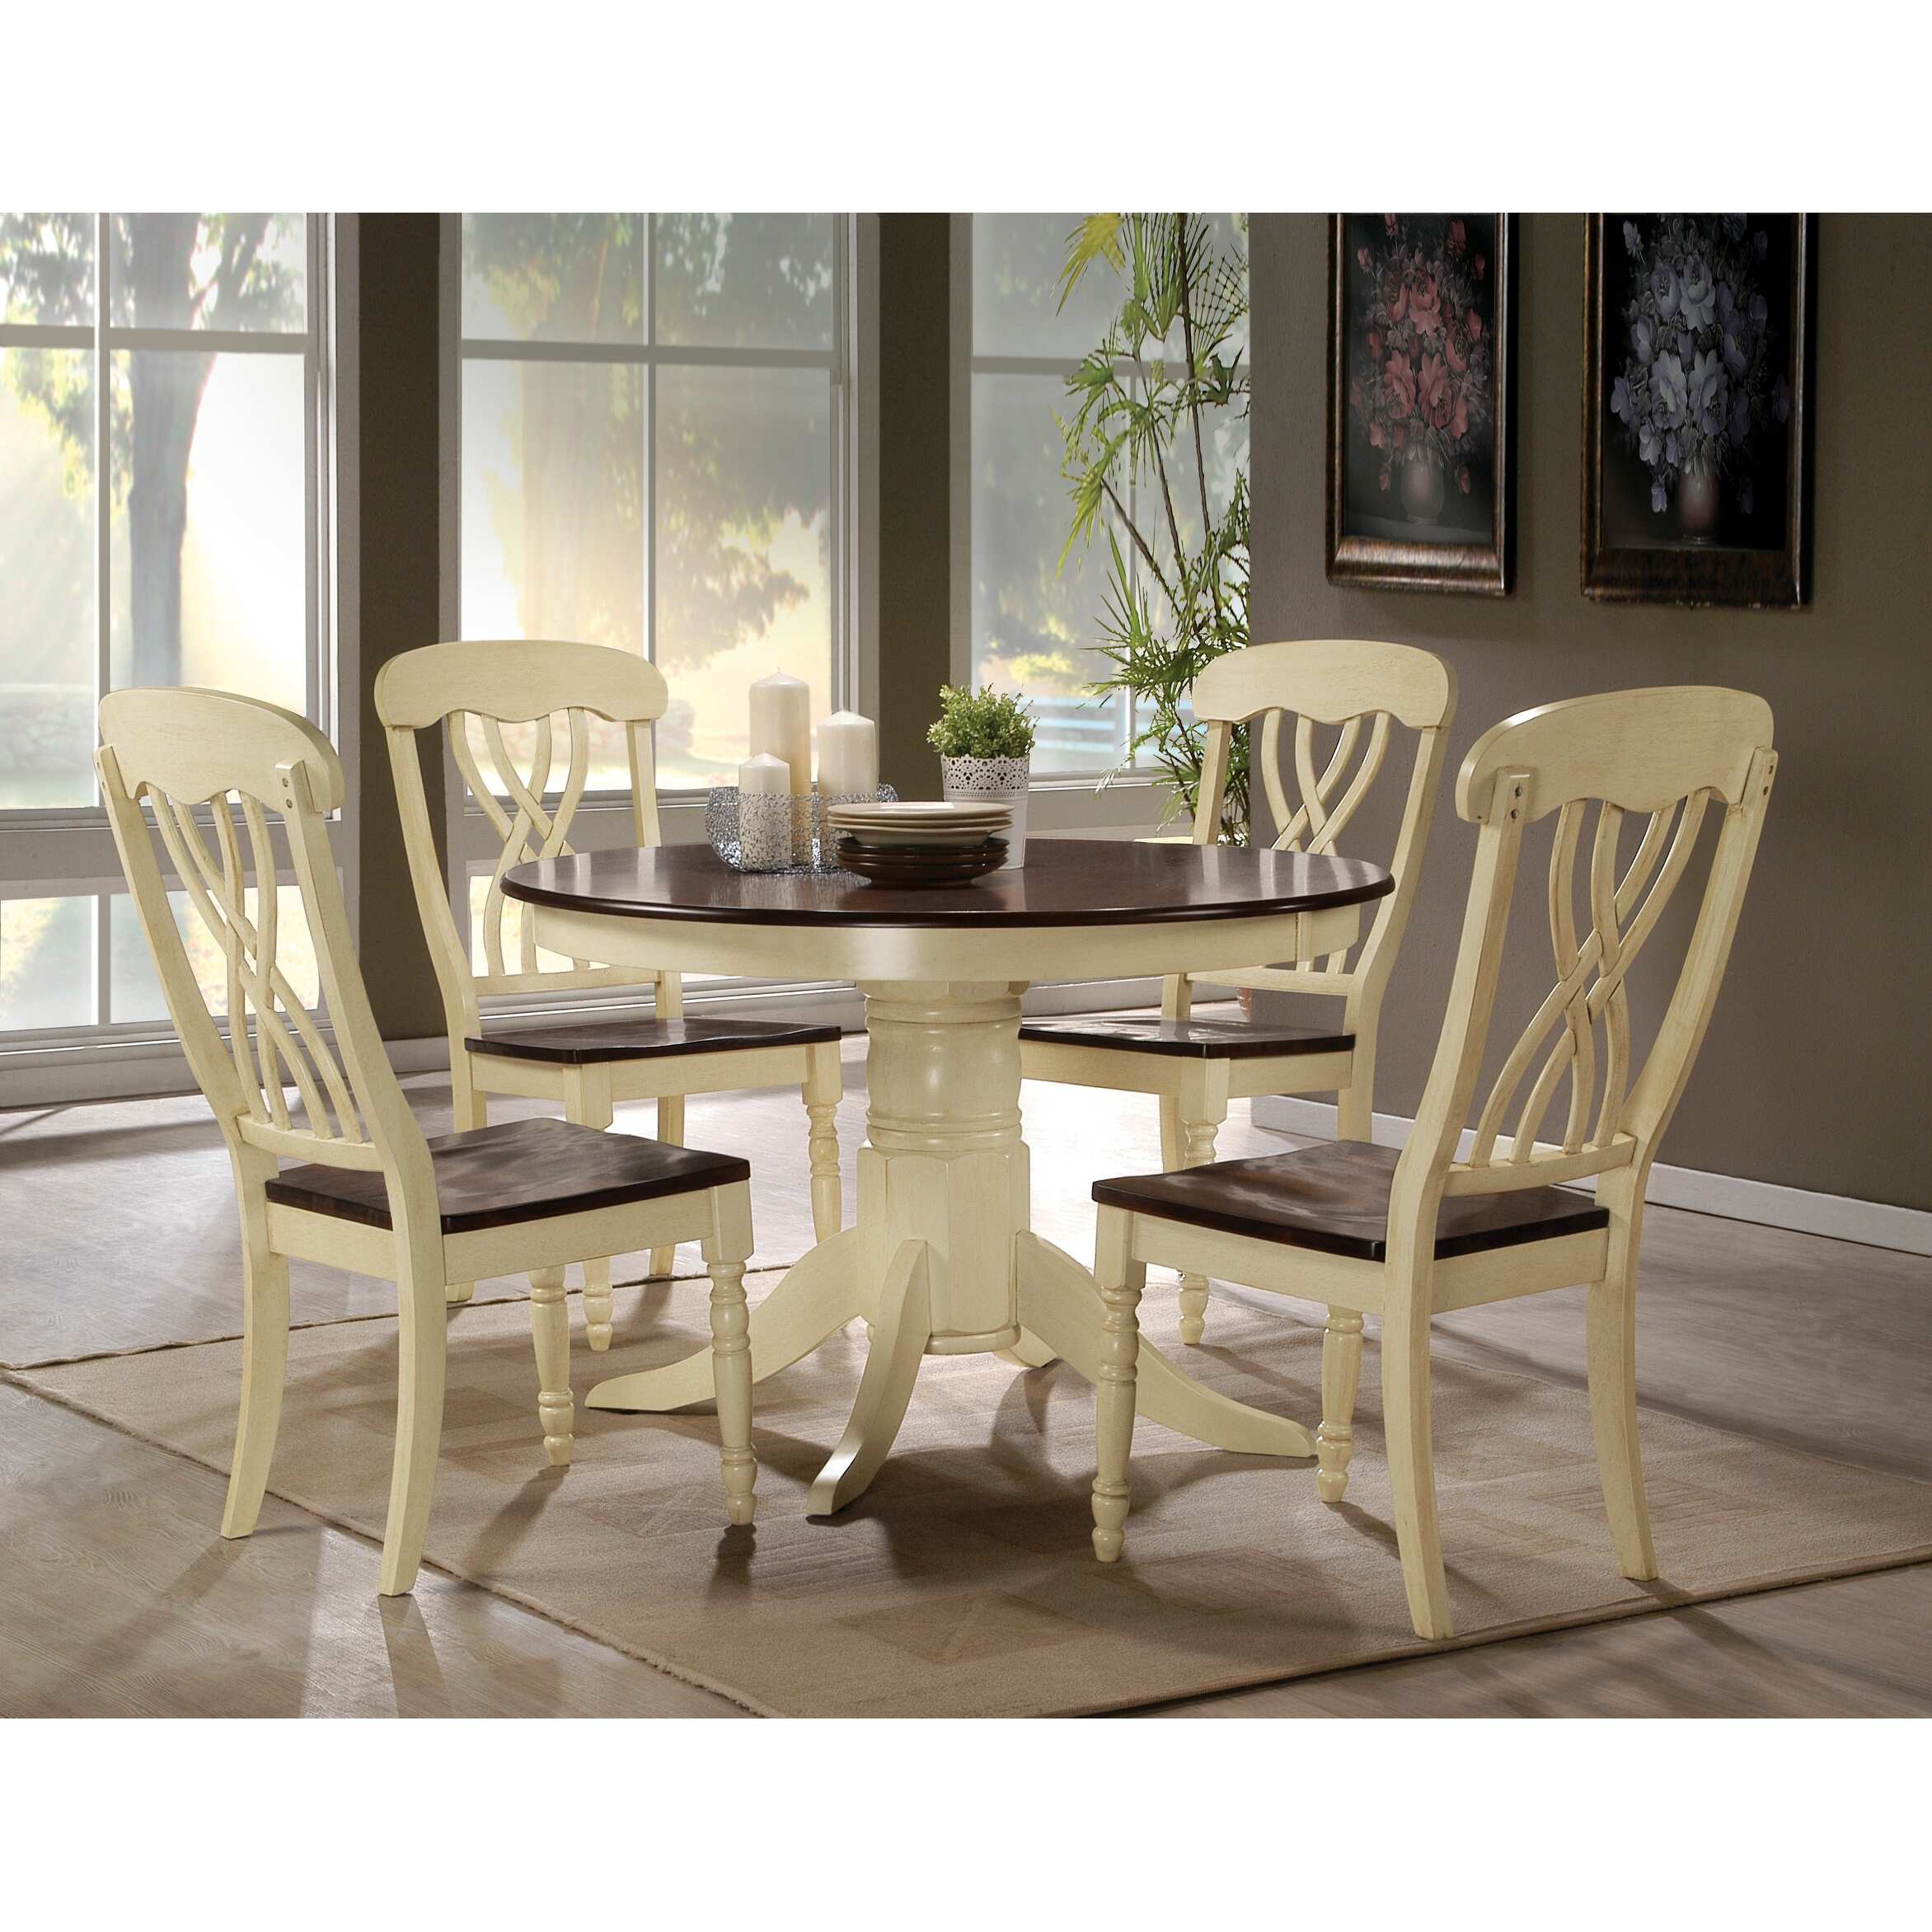 Querida Buttermilk and Oak Round Dining Table with Pedestal Base